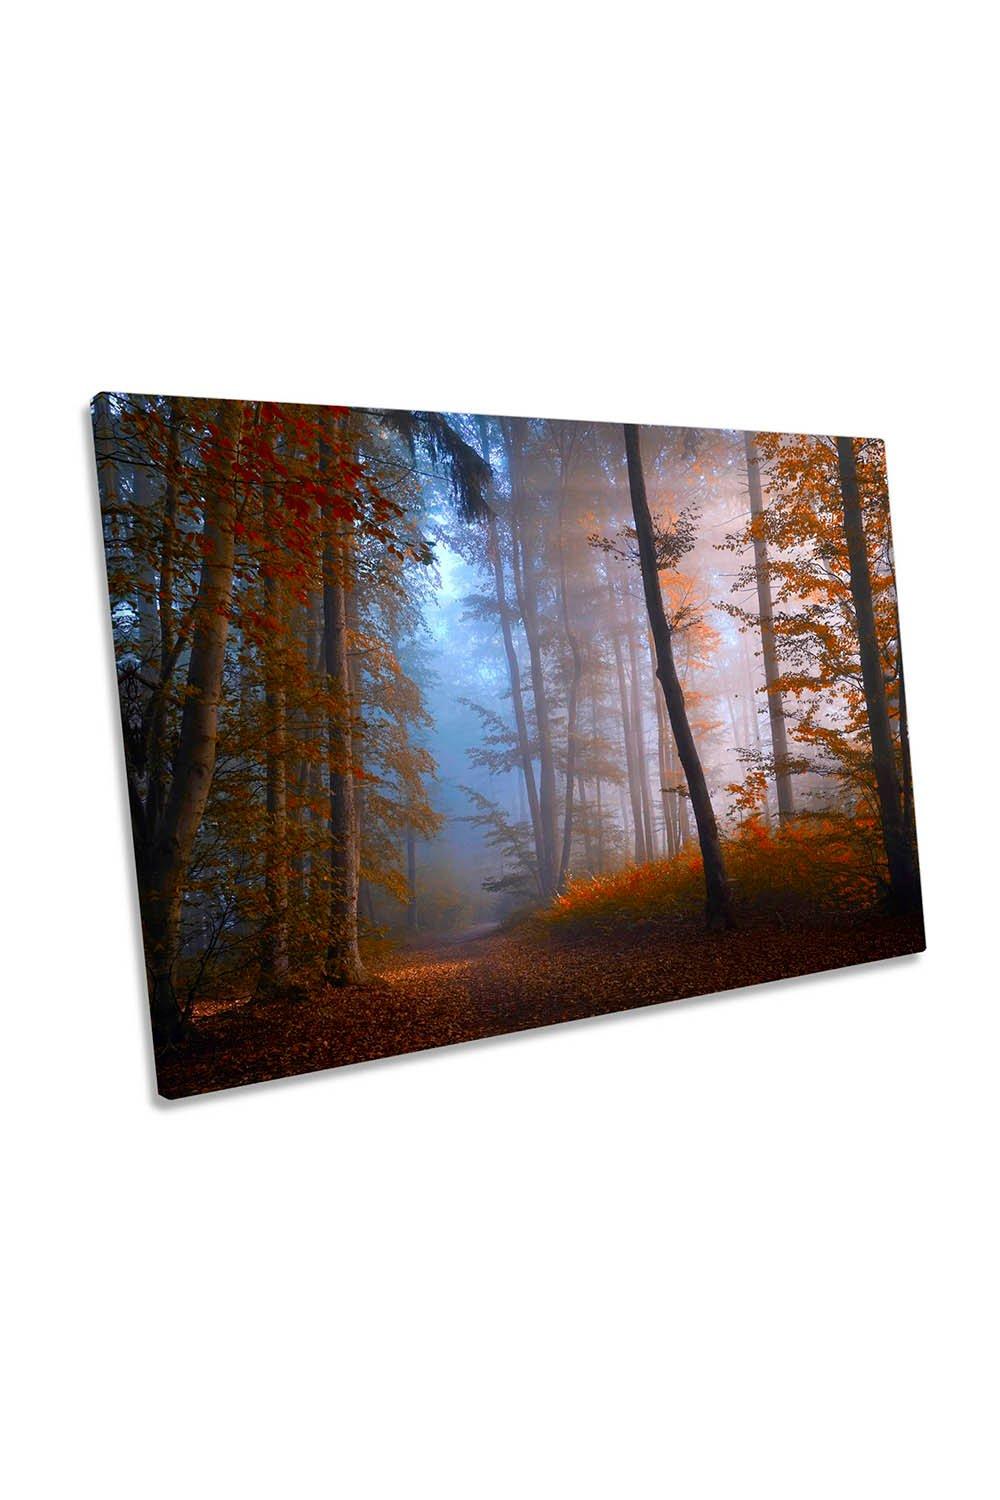 Autumn Colours Forest Sunset Canvas Wall Art Picture Print